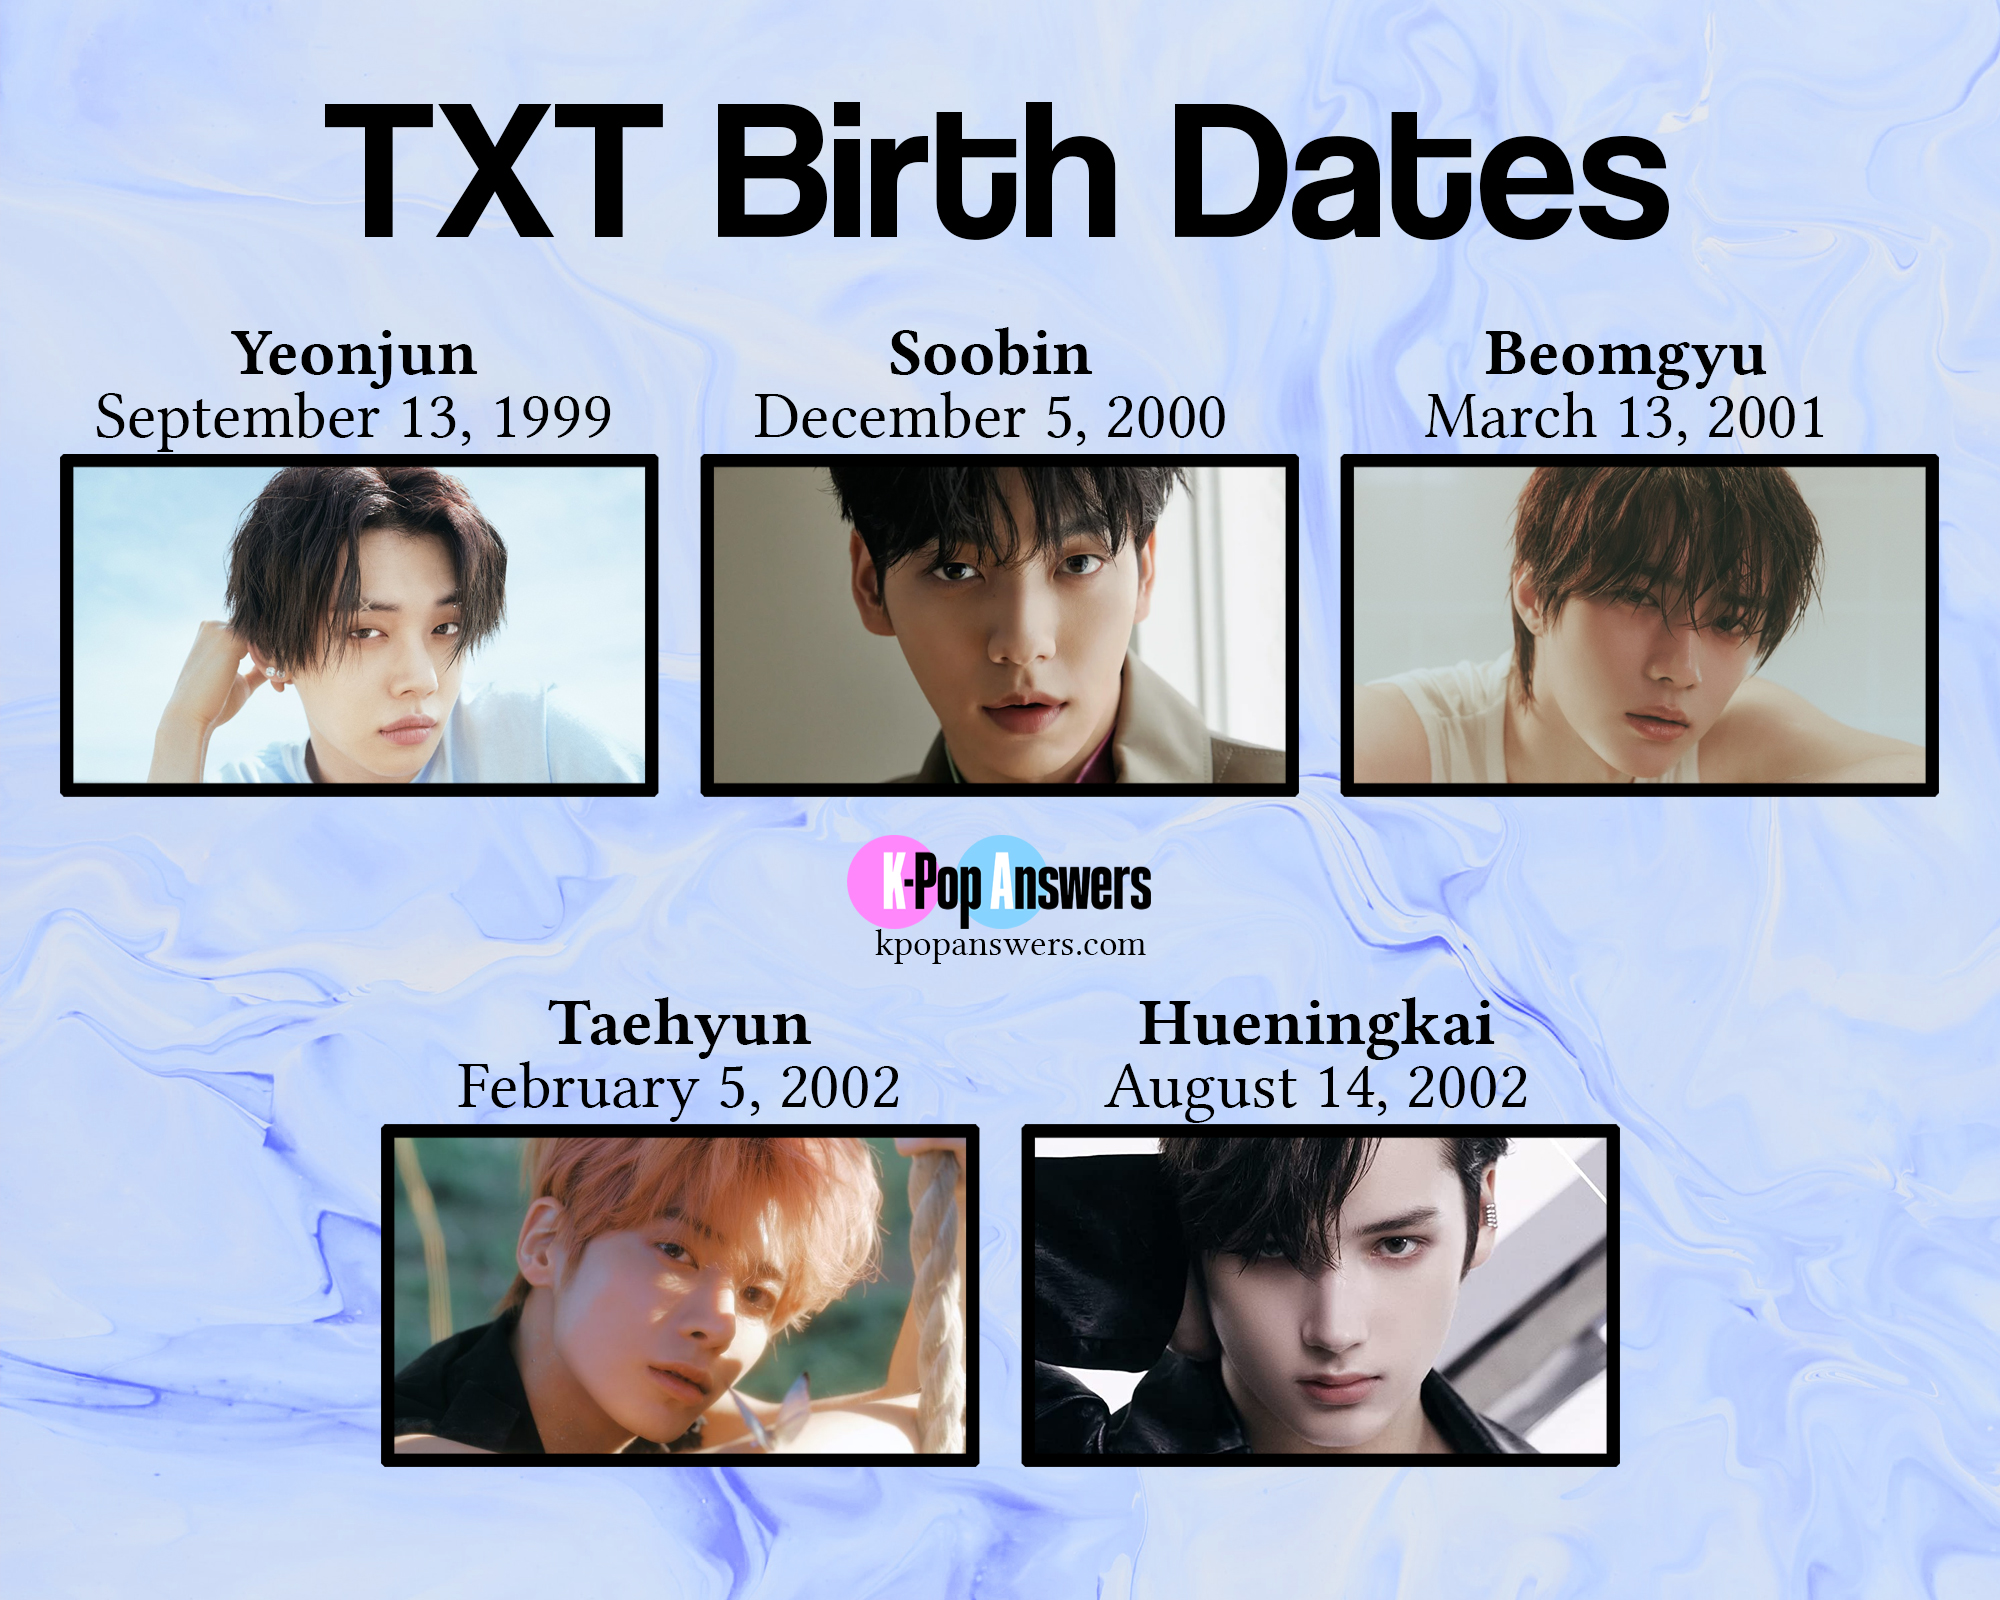 How Old Are the TXT Members?